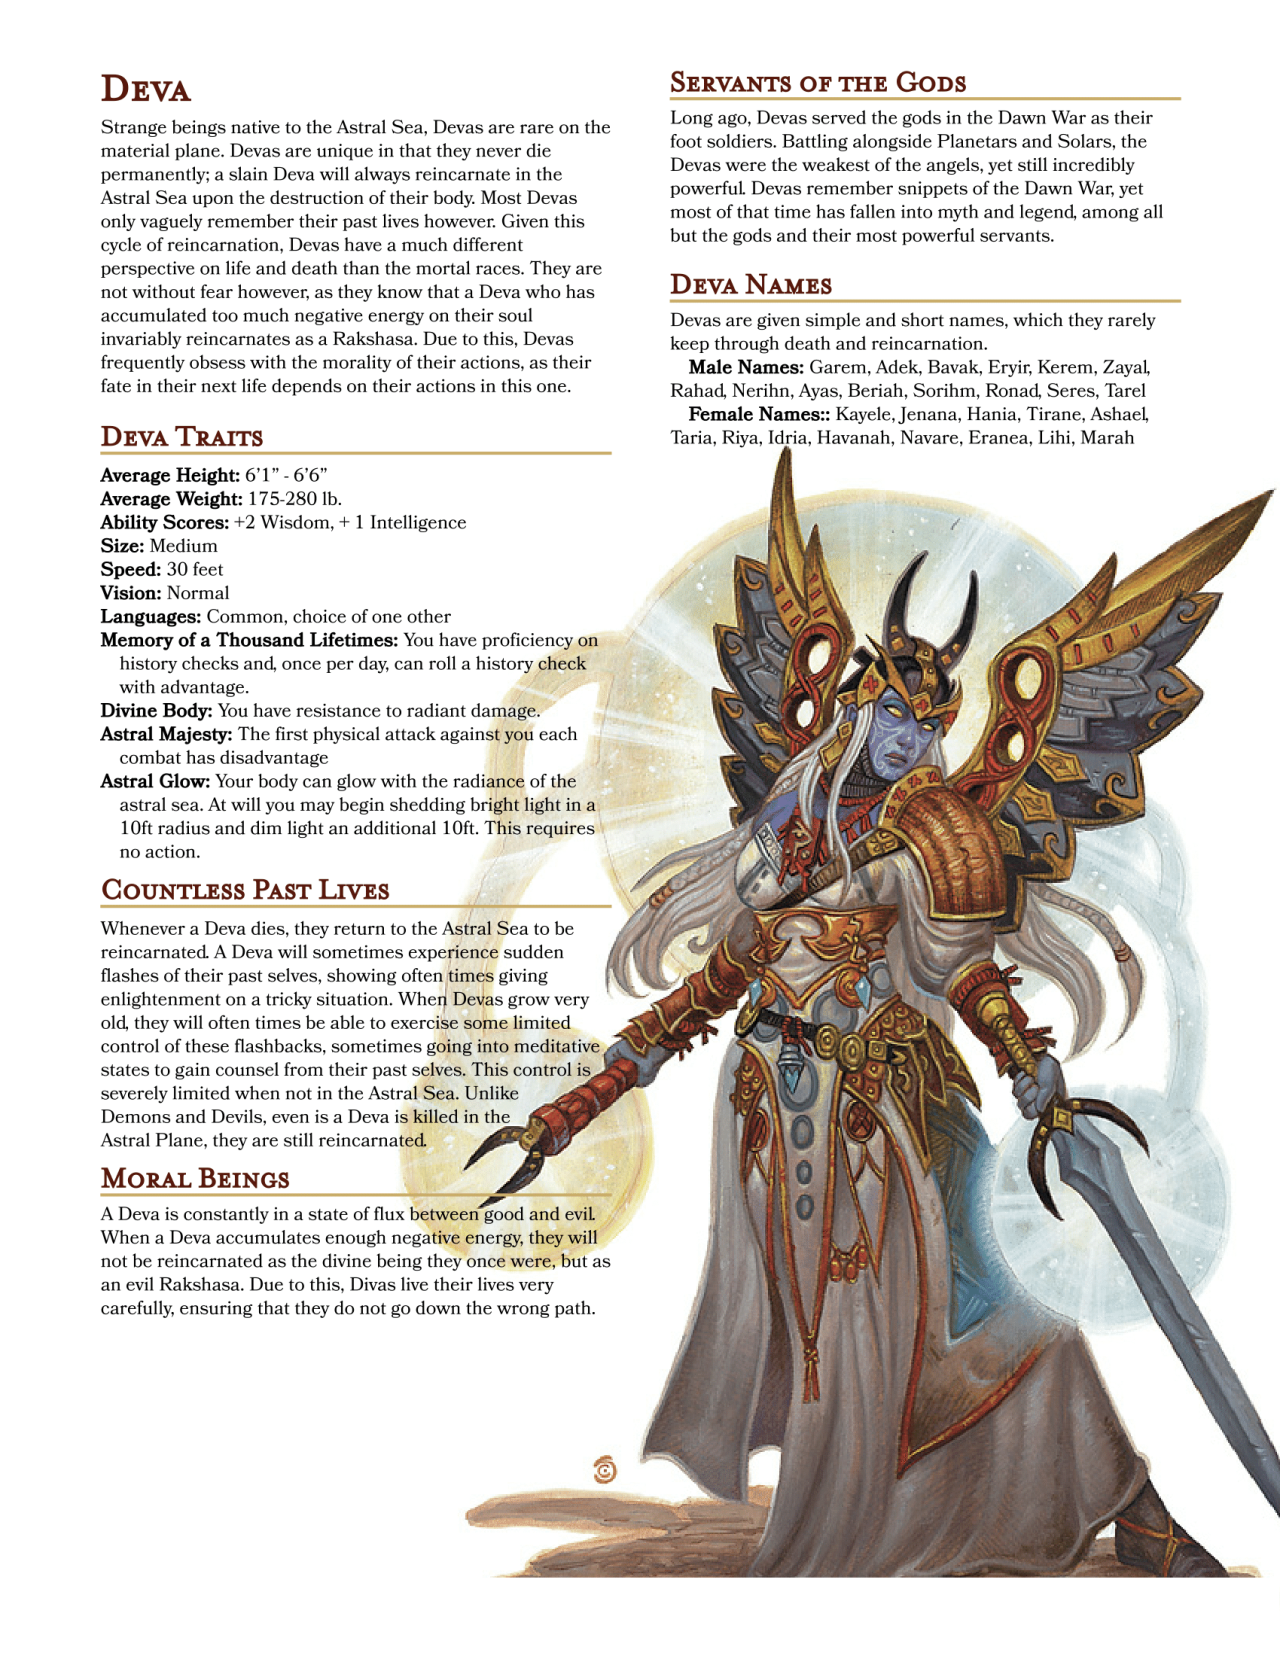 dnd homebrew races fighter